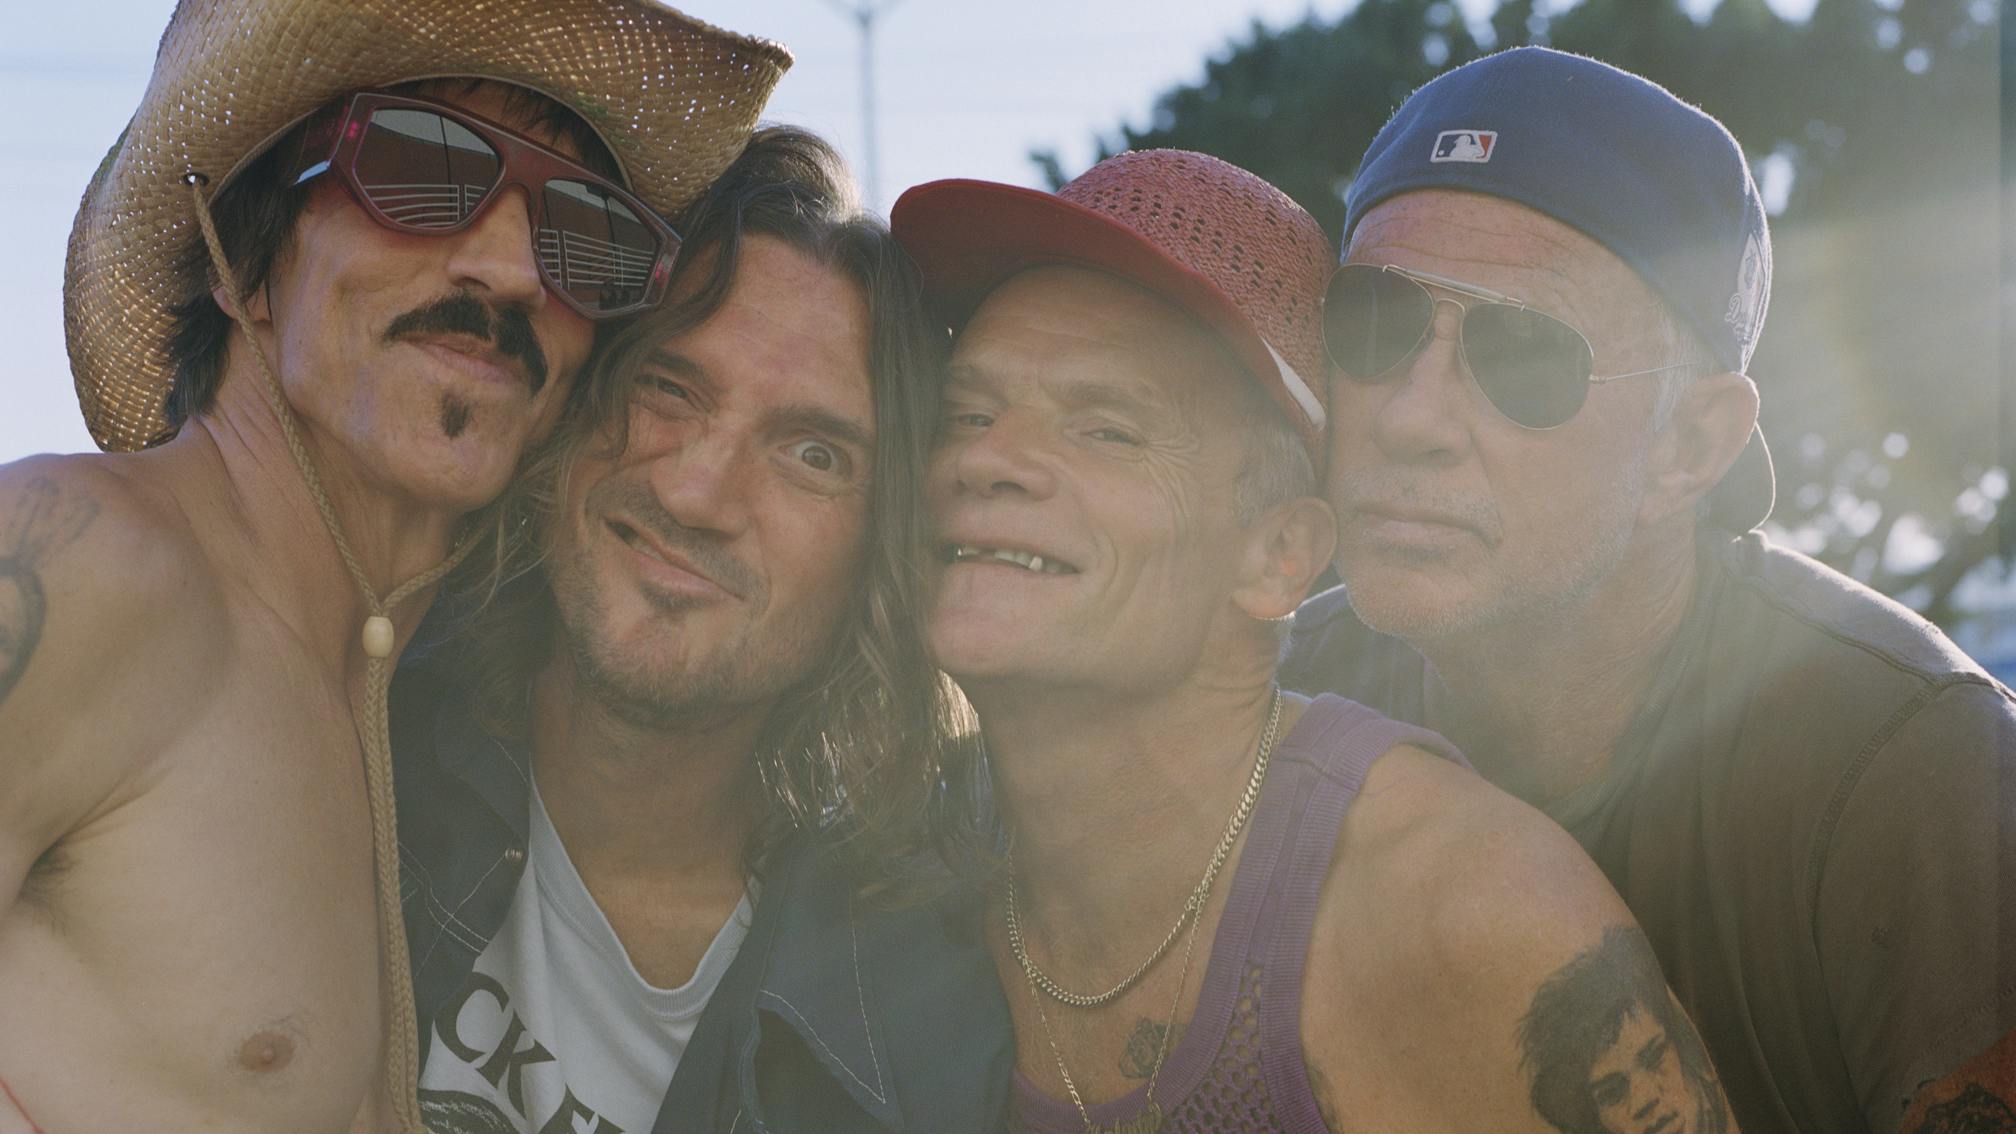 Red Hot Chili Peppers are teasing new music